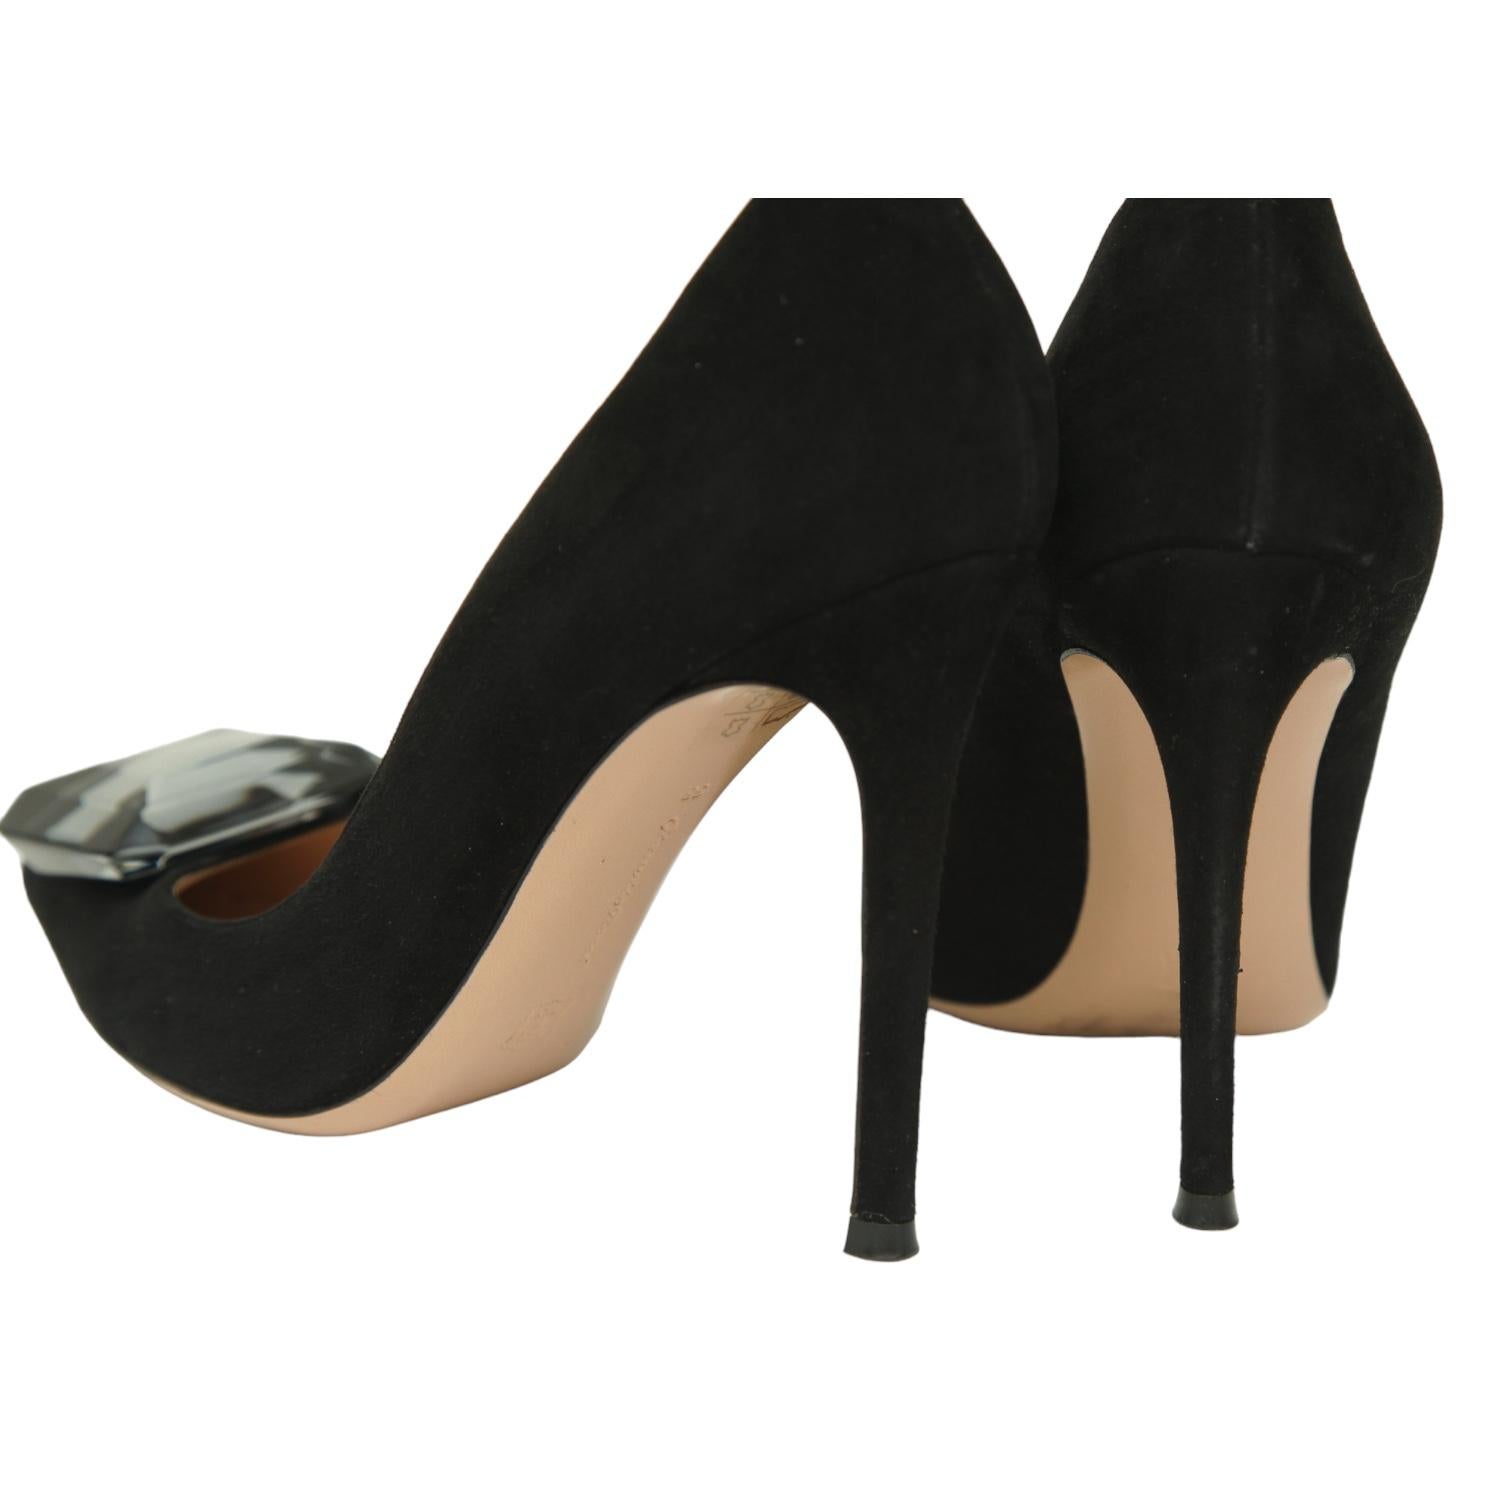 GIANVITO ROSSI Black Suede Leather Pump JAIPUR Crystal Pointed Toe 38 $1200 For Sale 6